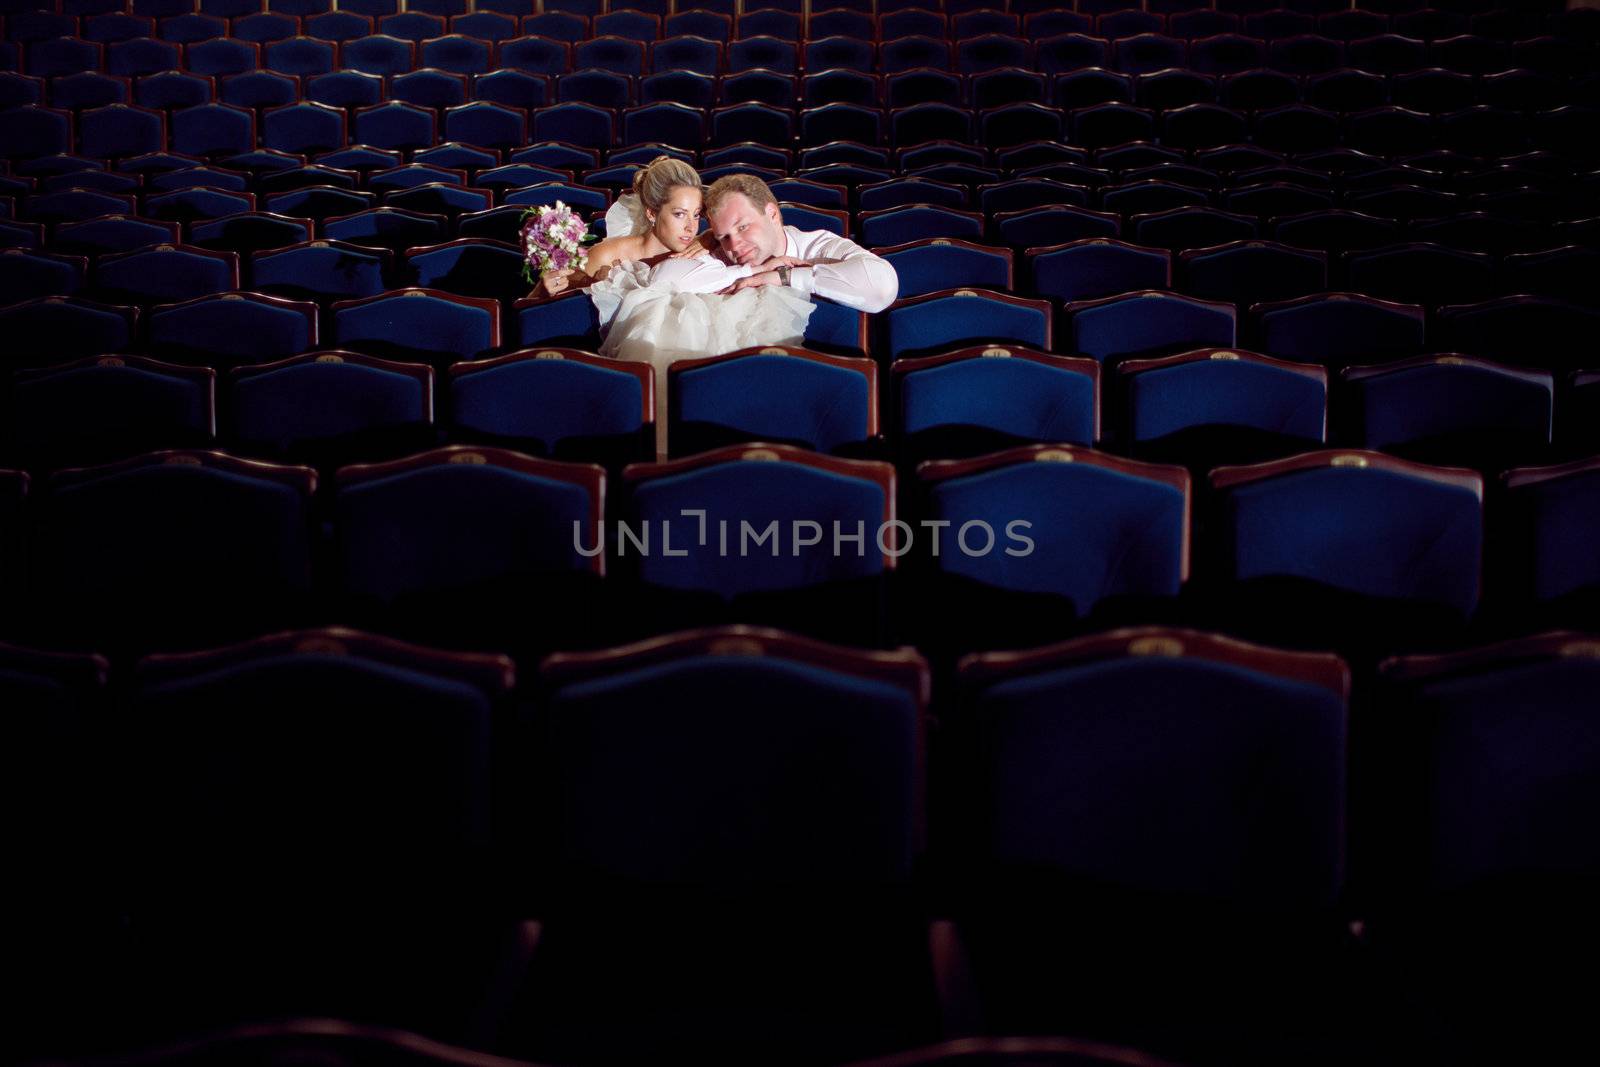 bride and groom at the theatre kissing